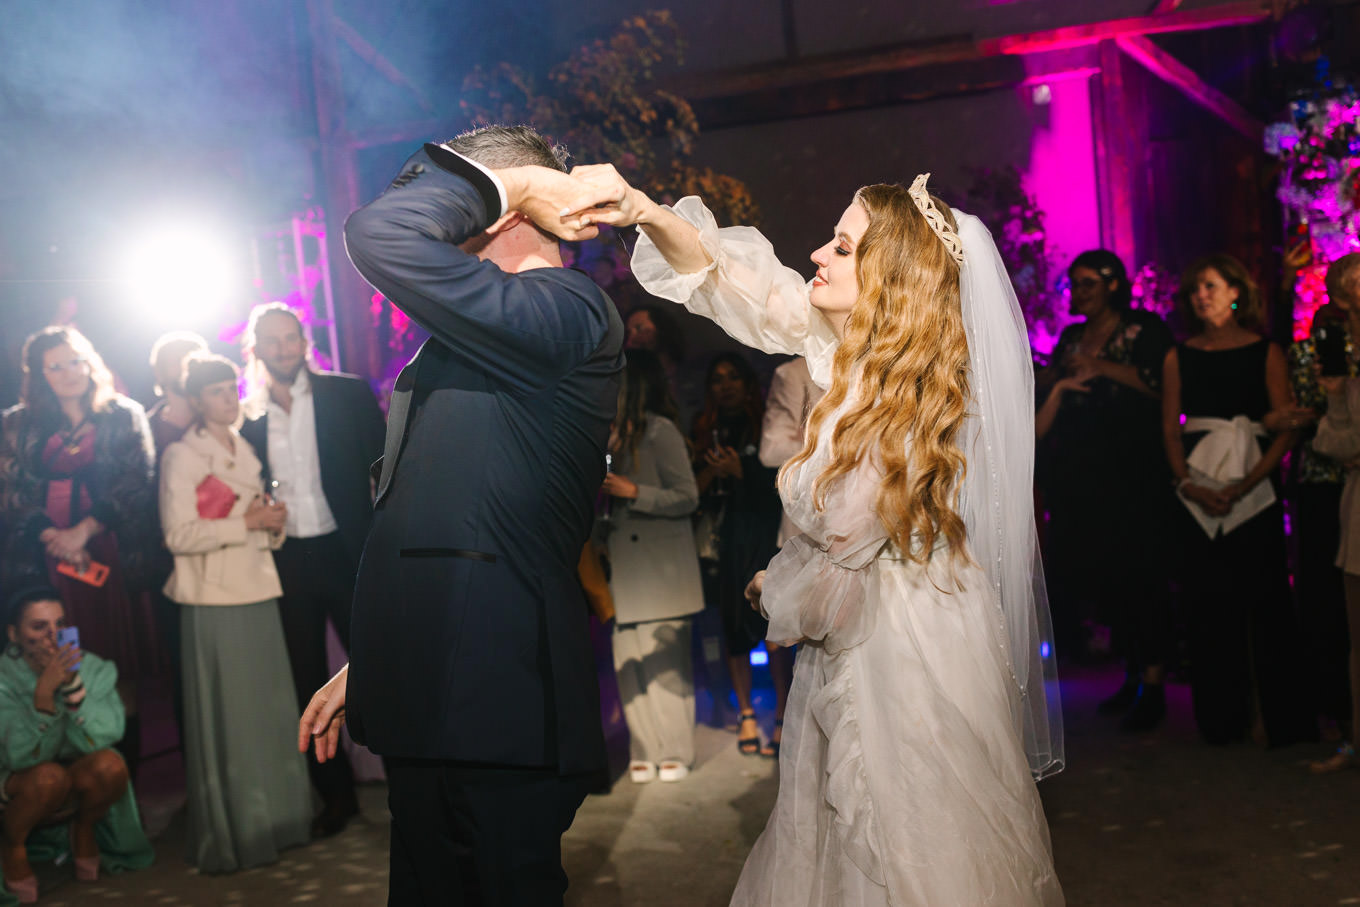 Bride and groom first dance at wedding | Colorful and quirky wedding at Higuera Ranch in San Luis Obispo | #sanluisobispowedding #californiawedding #higueraranch #madonnainn   
Source: Mary Costa Photography | Los Angeles